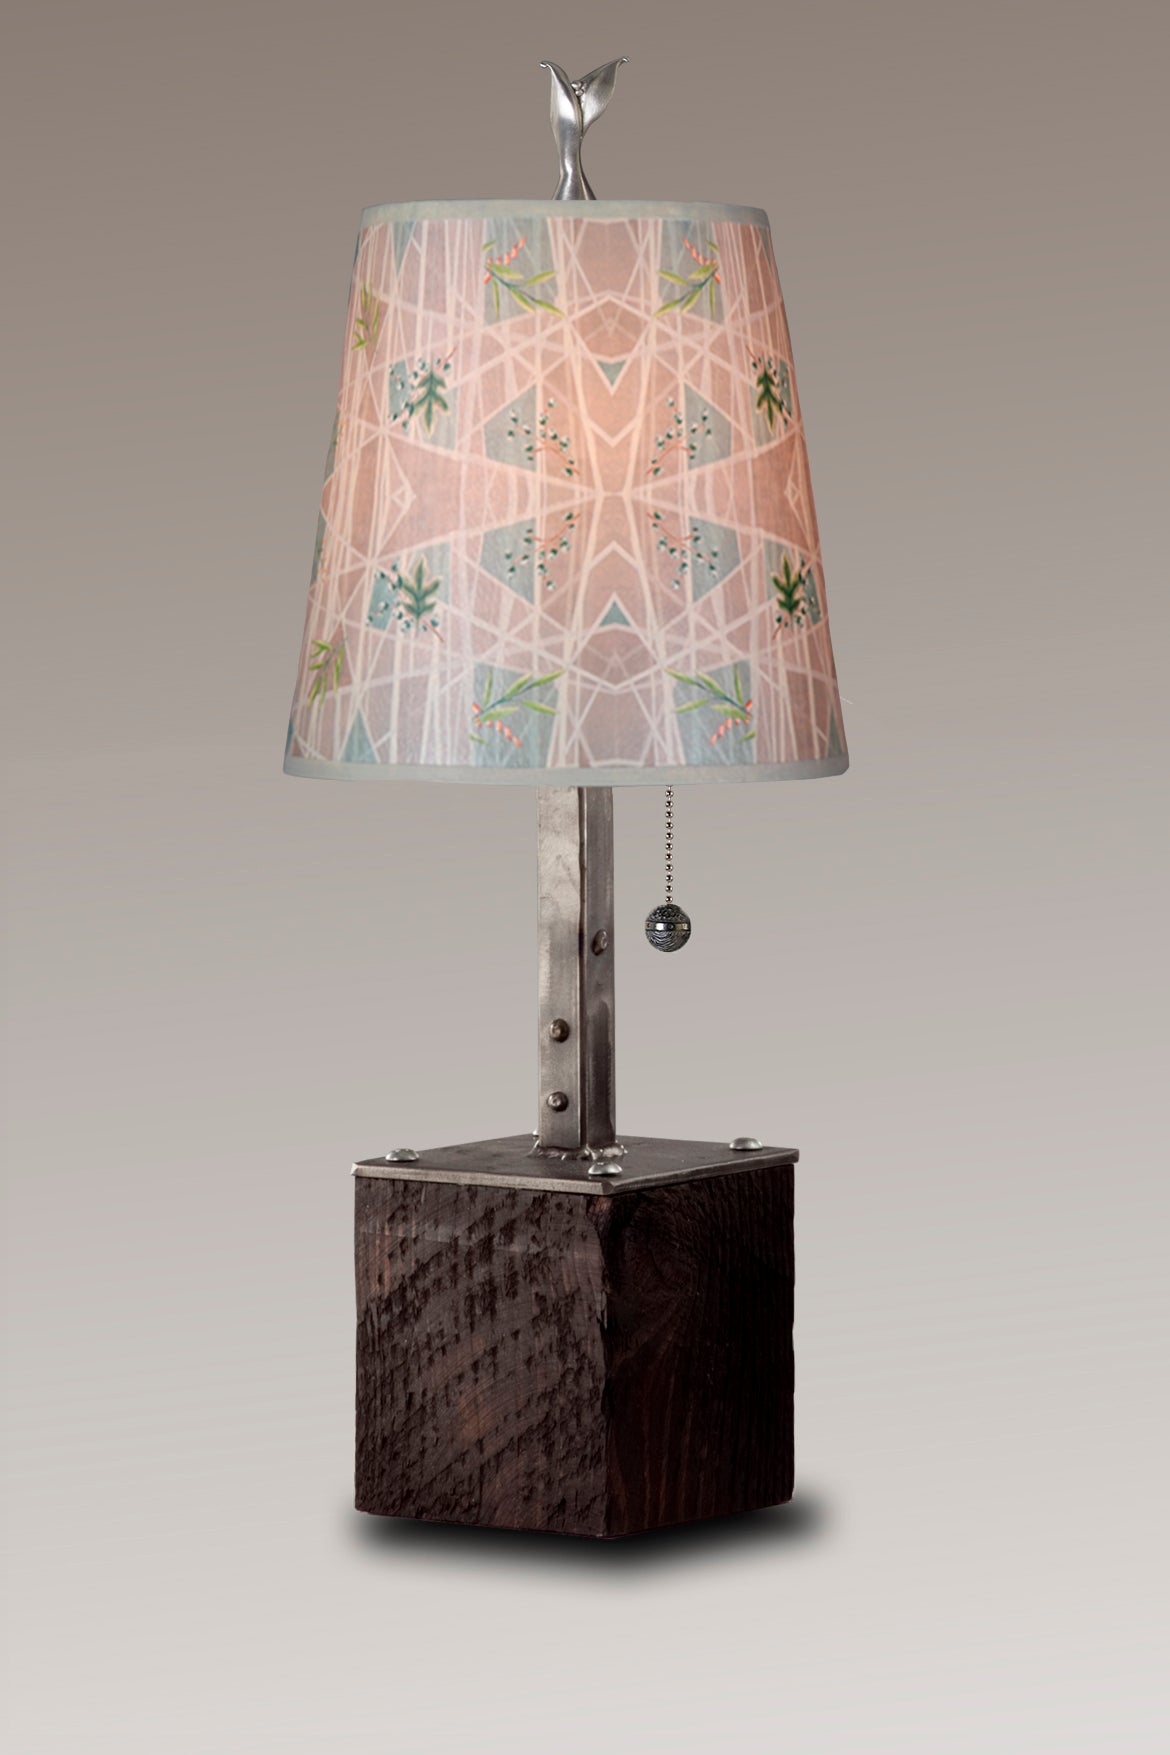 Janna Ugone & Co Table Lamps Steel Table Lamp on Reclaimed Wood with Small Drum Shade in Prism